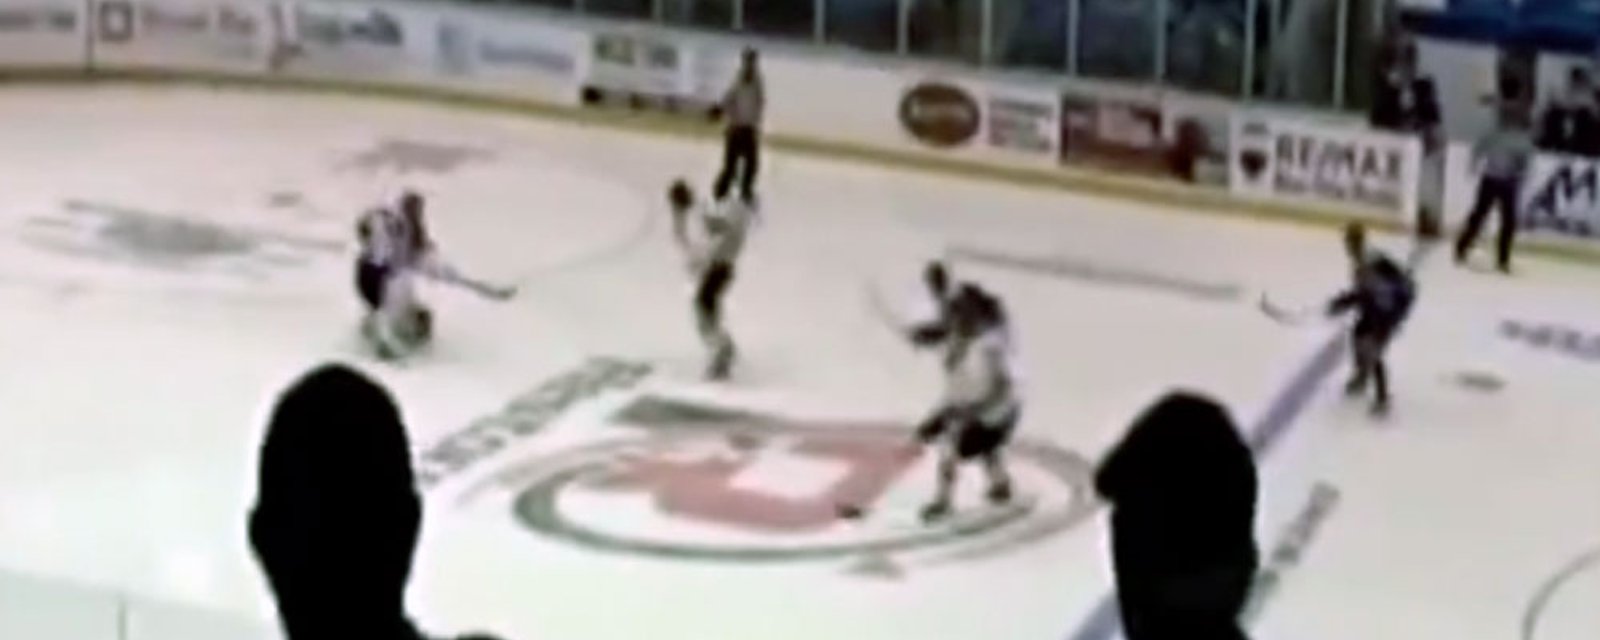 Junior player receives 25 game suspension after demolishing goalie with open ice hit